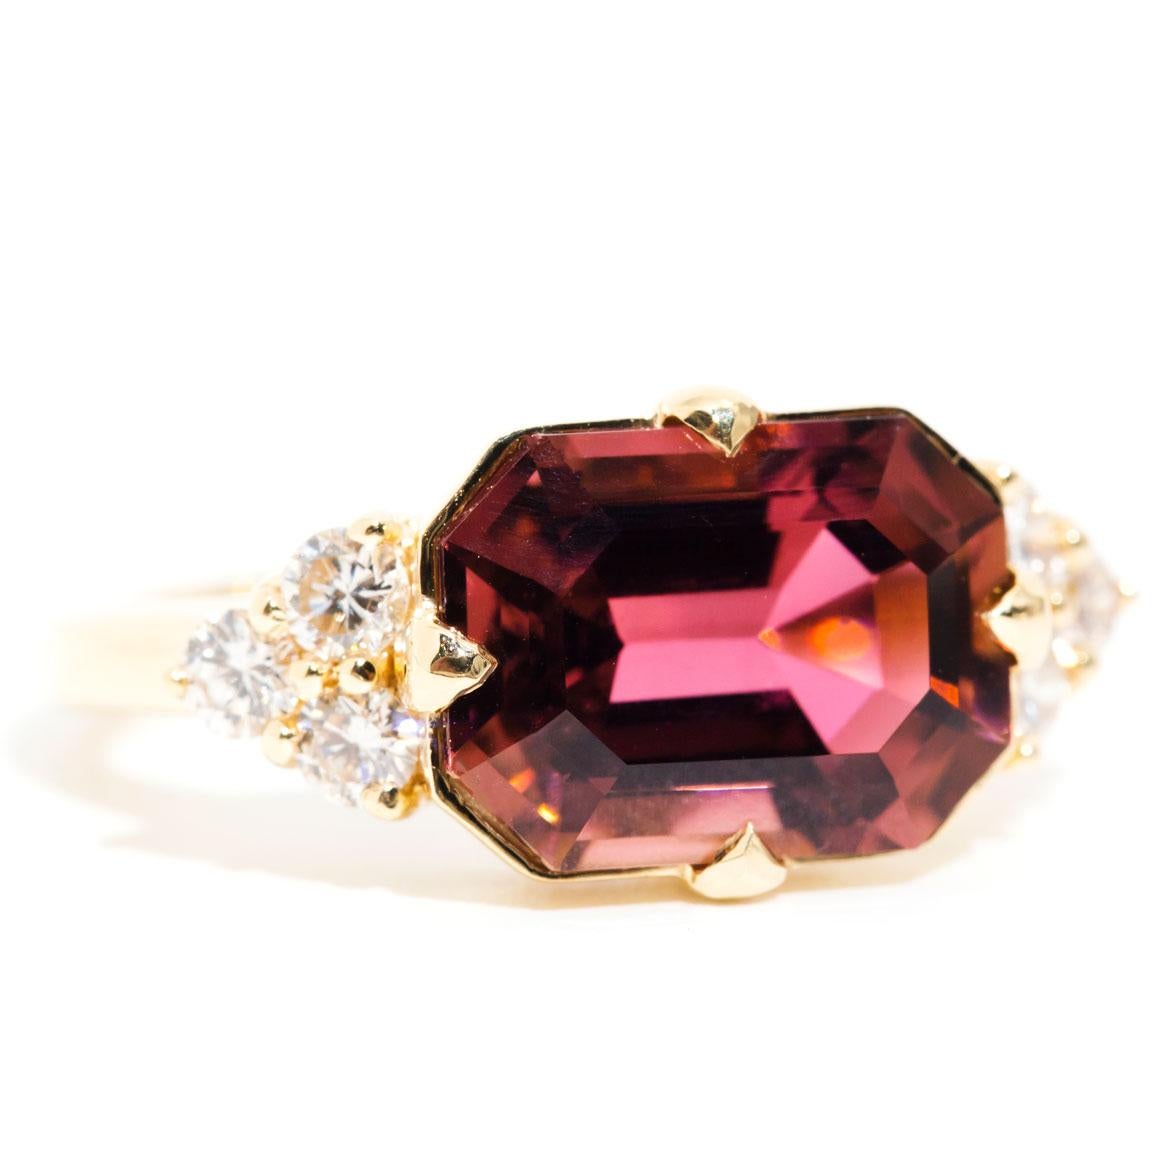 Forged in 18 carat yellow gold, this uniquely designed art deco inspired ring features an alluring 4.87 carat bright reddish pink emerald cut Tourmaline complimented by glittering round brilliant cut diamonds. We have named this stunning ring The